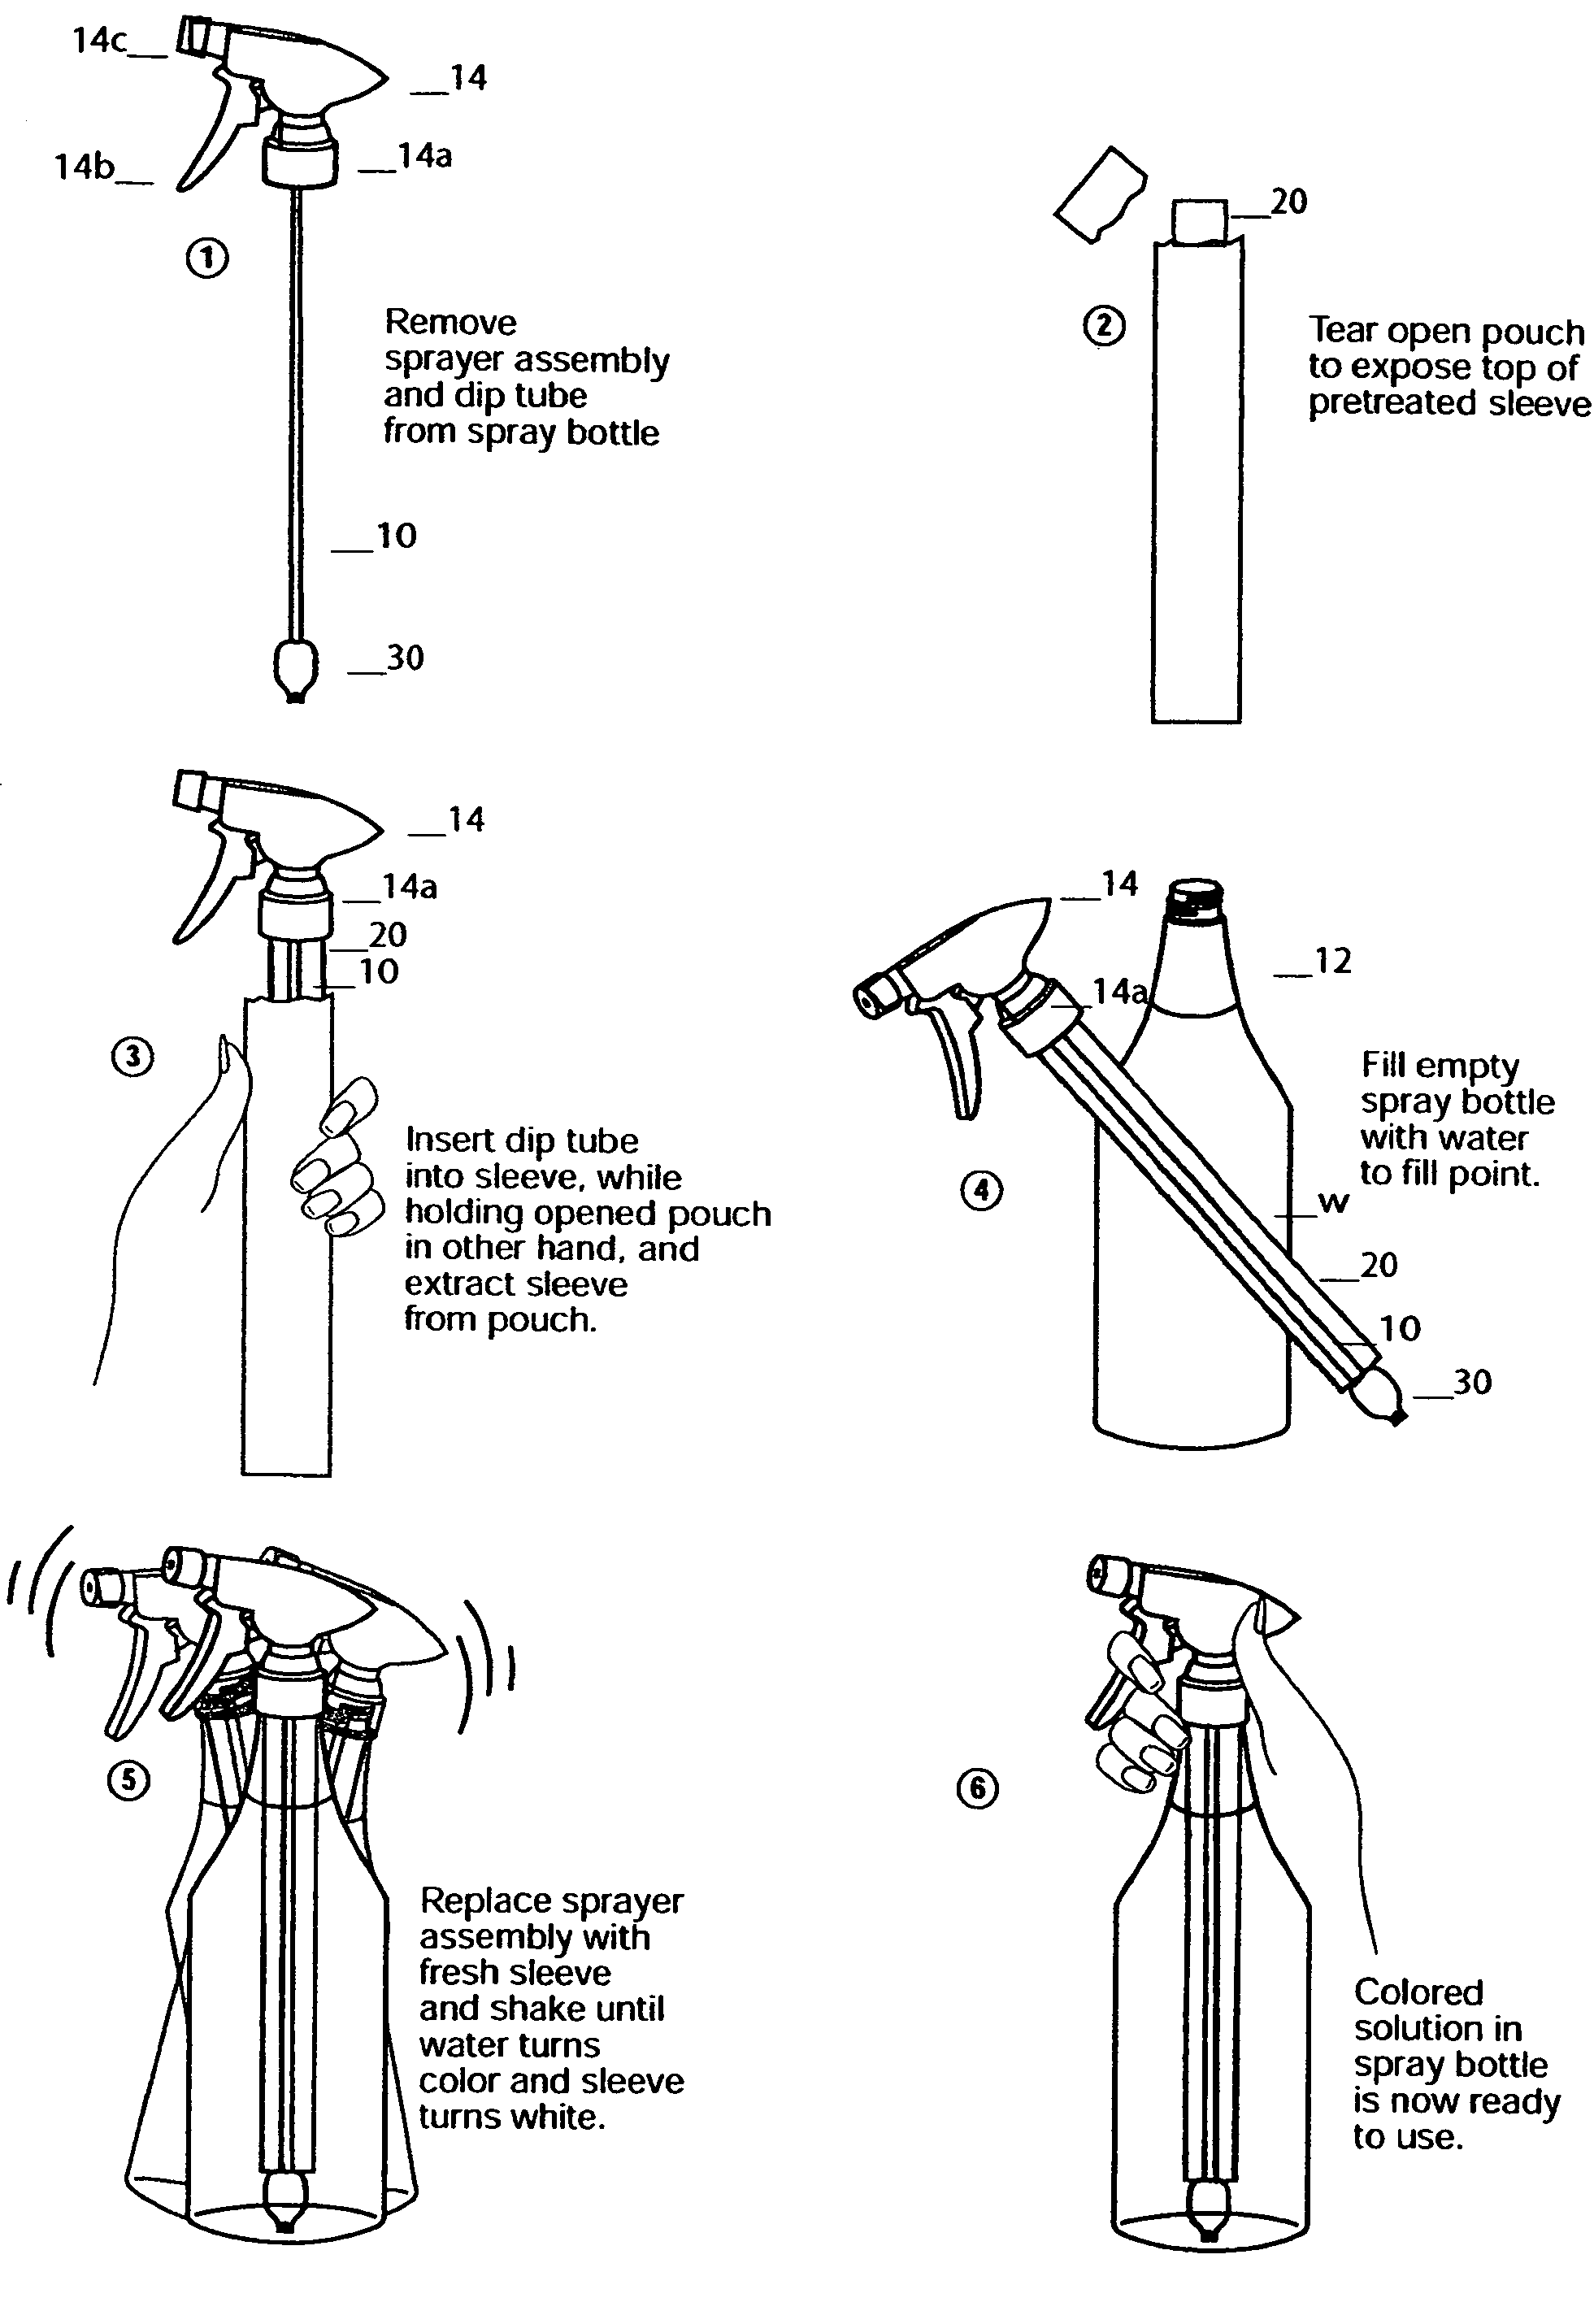 Retainer for sleeve for recharging a cleaning, sanitizing or disinfectant fluid spray system